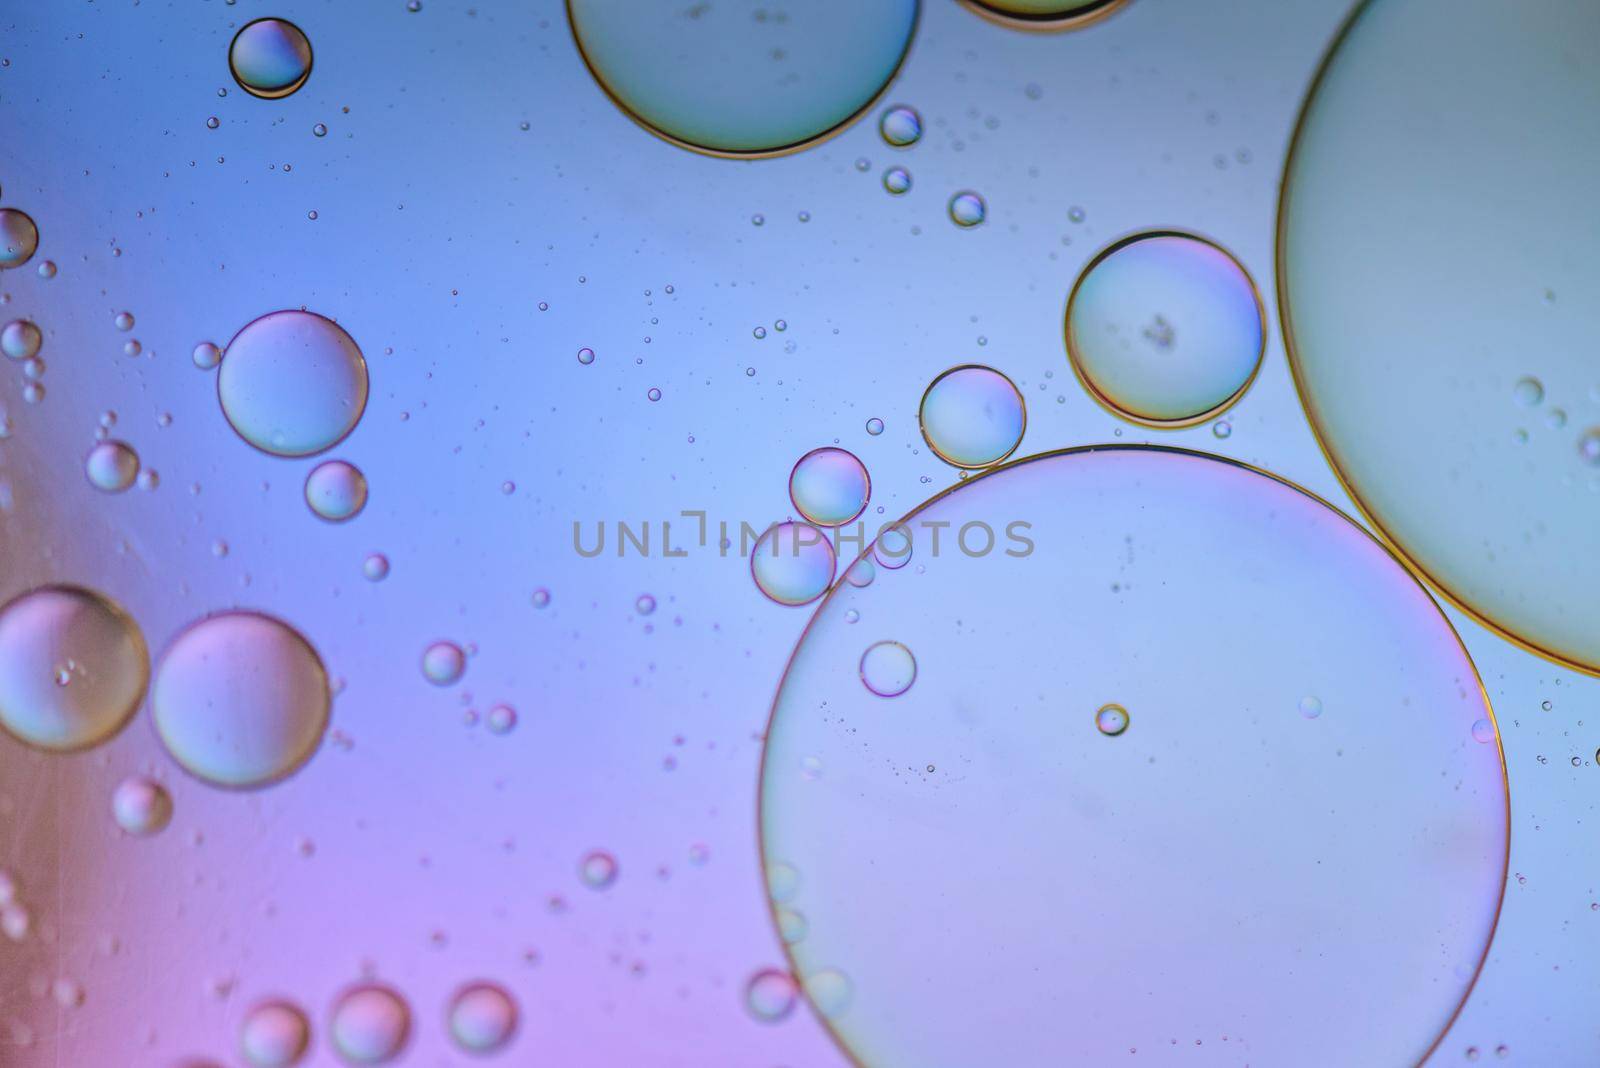 Multicolored abstract background picture made with oil, water and soap by anytka